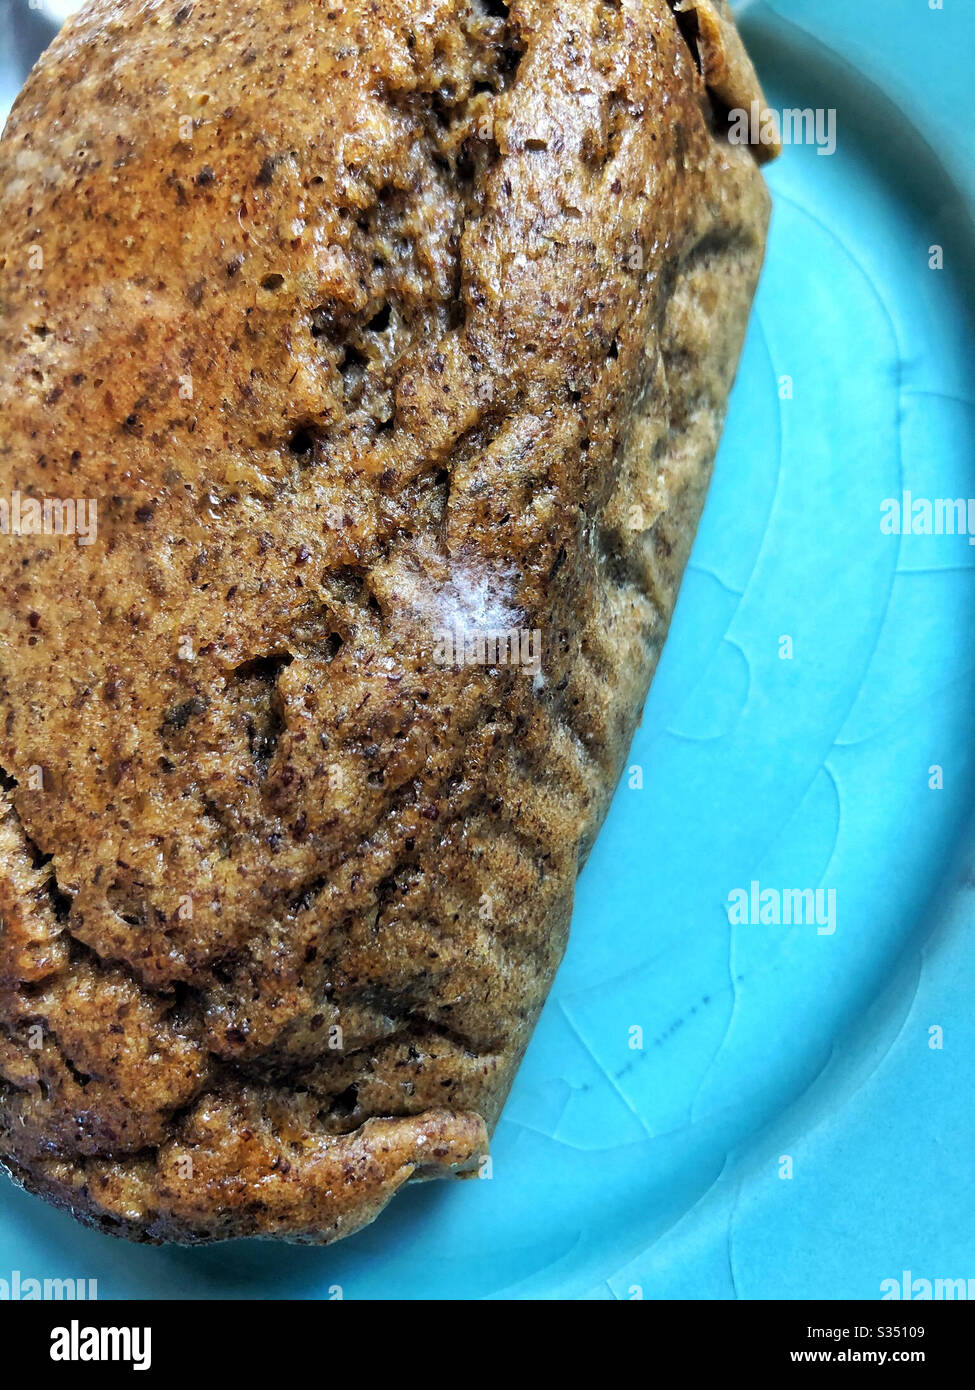 Bread Mold - Stock Image - C007/6142 - Science Photo Library